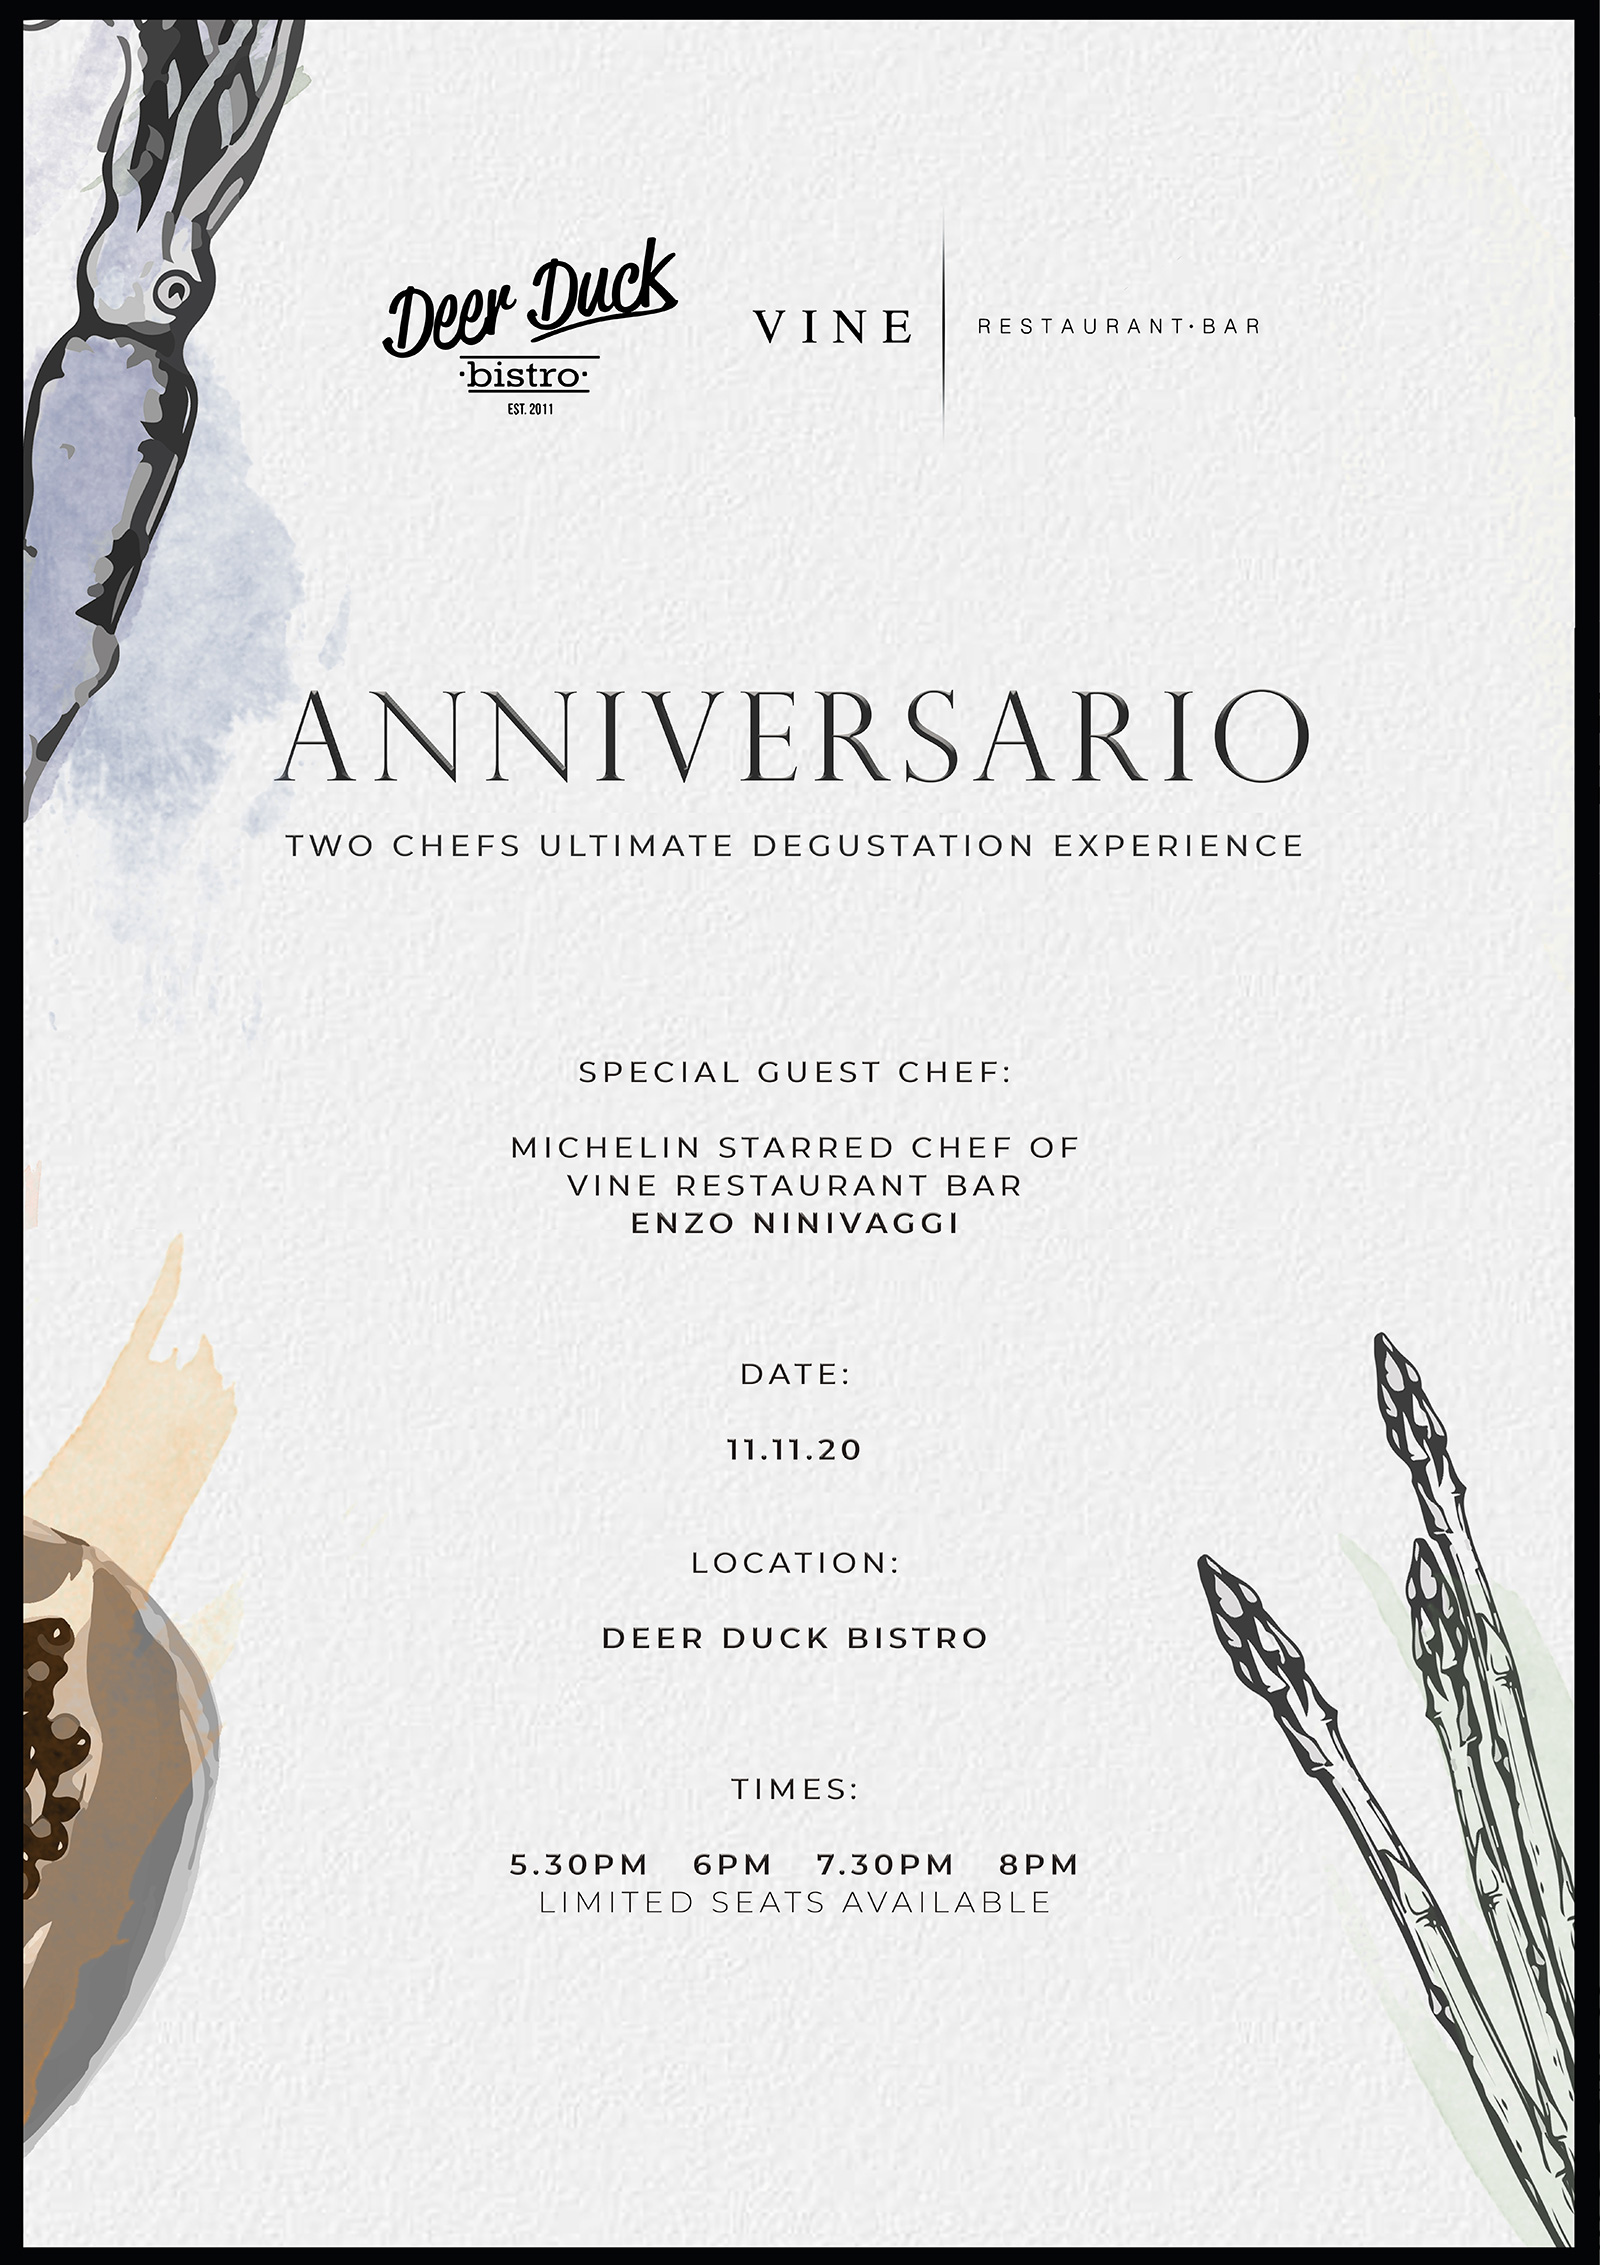 Anniversary Dinner at Deer Duck Bistro with guest Chef Enzo Ninivaggi